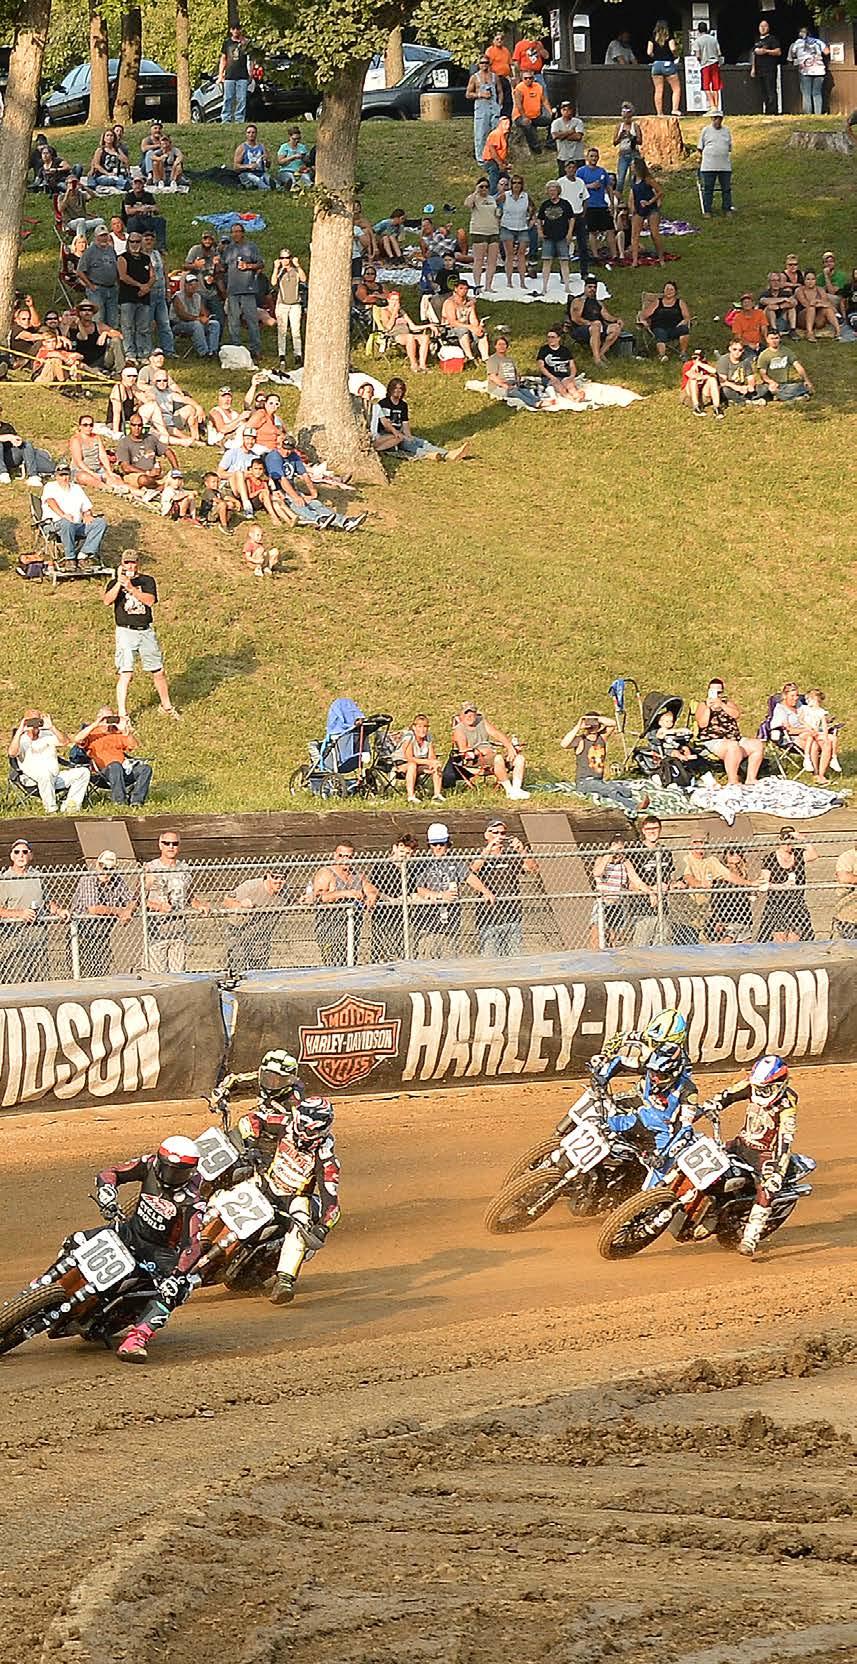 VOL. 55 ISSUE 33 AUGUST 21, 2018 P71 BY DAVE HOENIG PHOTOGRAPHY BY FLAT TRAK FOTOS In so many ways it was not the typical Peoria TT, other than the oppressive humidity and the race winner.